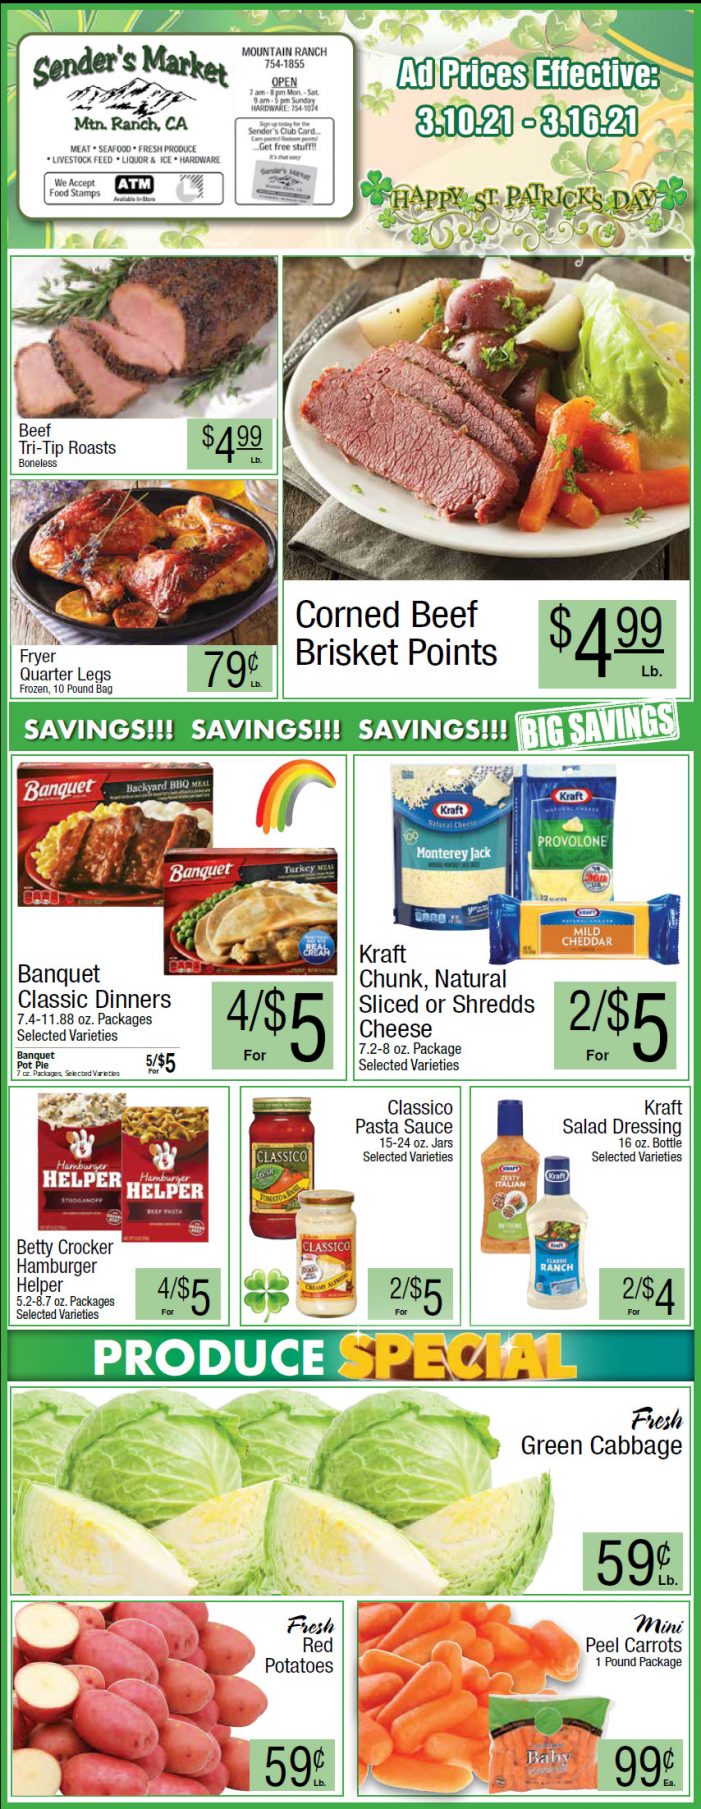 Sender’s Market’s Weekly Ad & Grocery Specials Through March 16th.  Shop Local & Save!